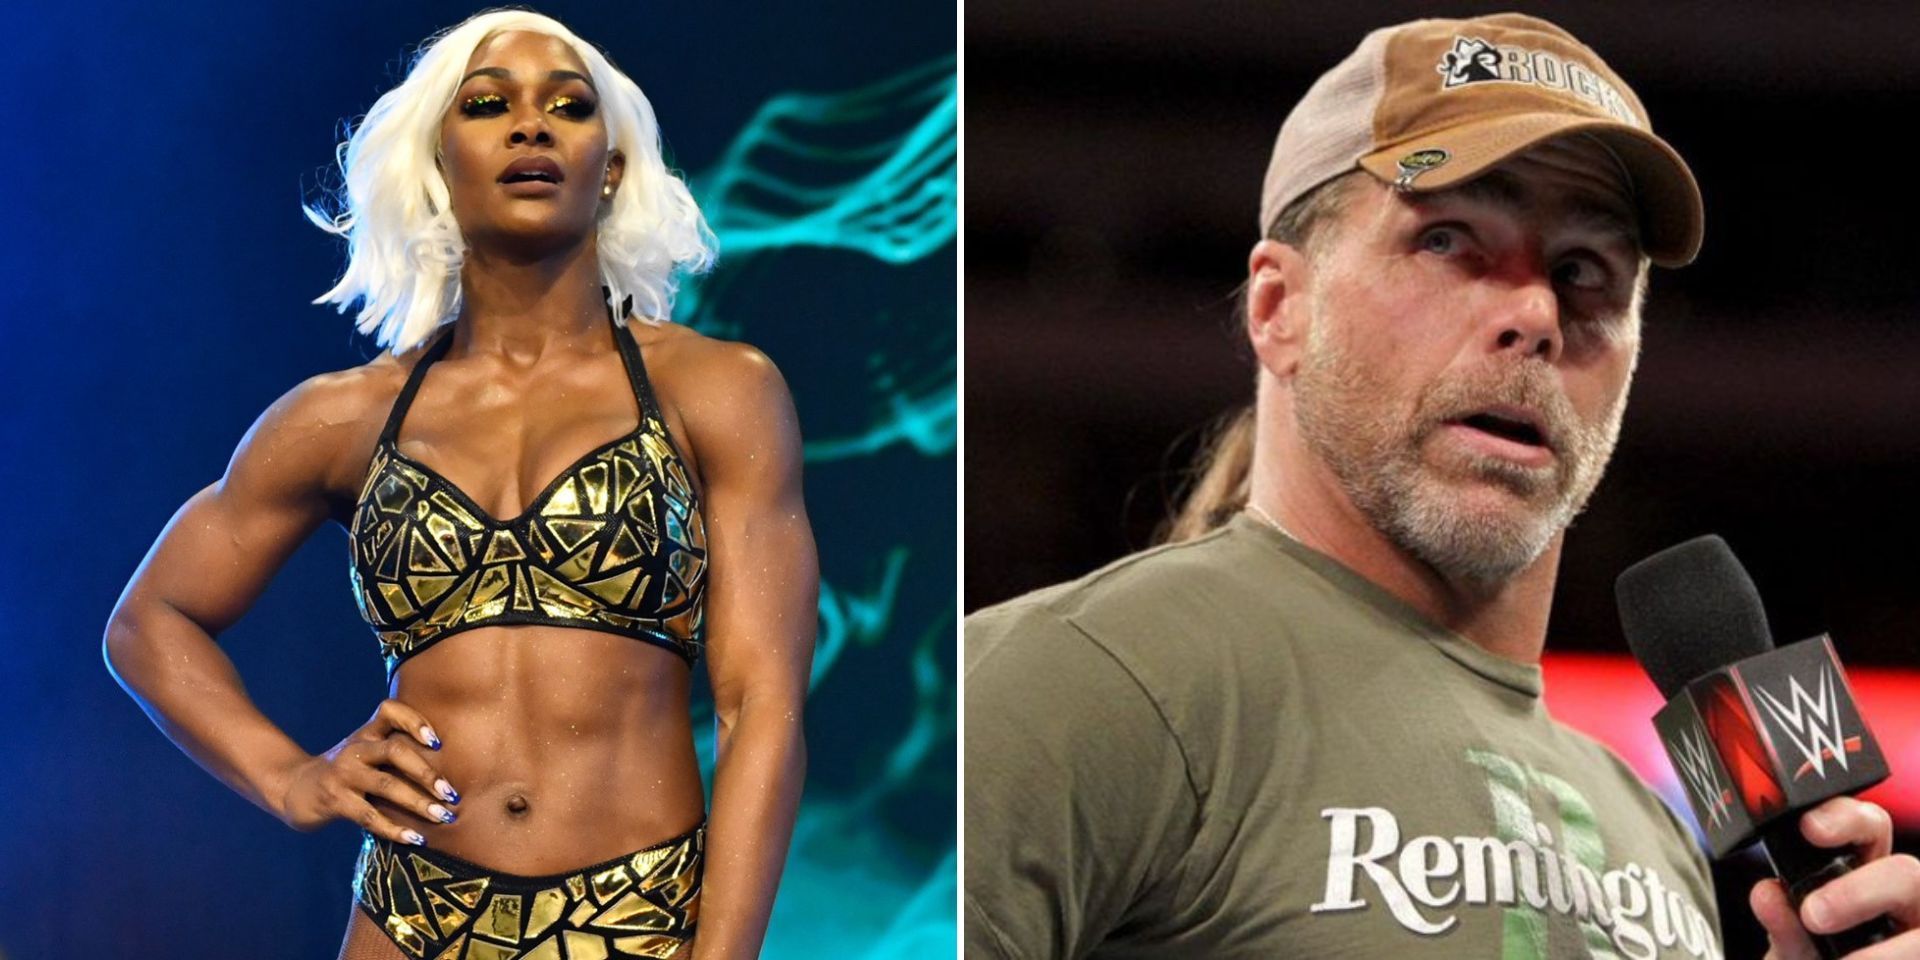 Shawn Michaels shared his opinion on Jade Cargill